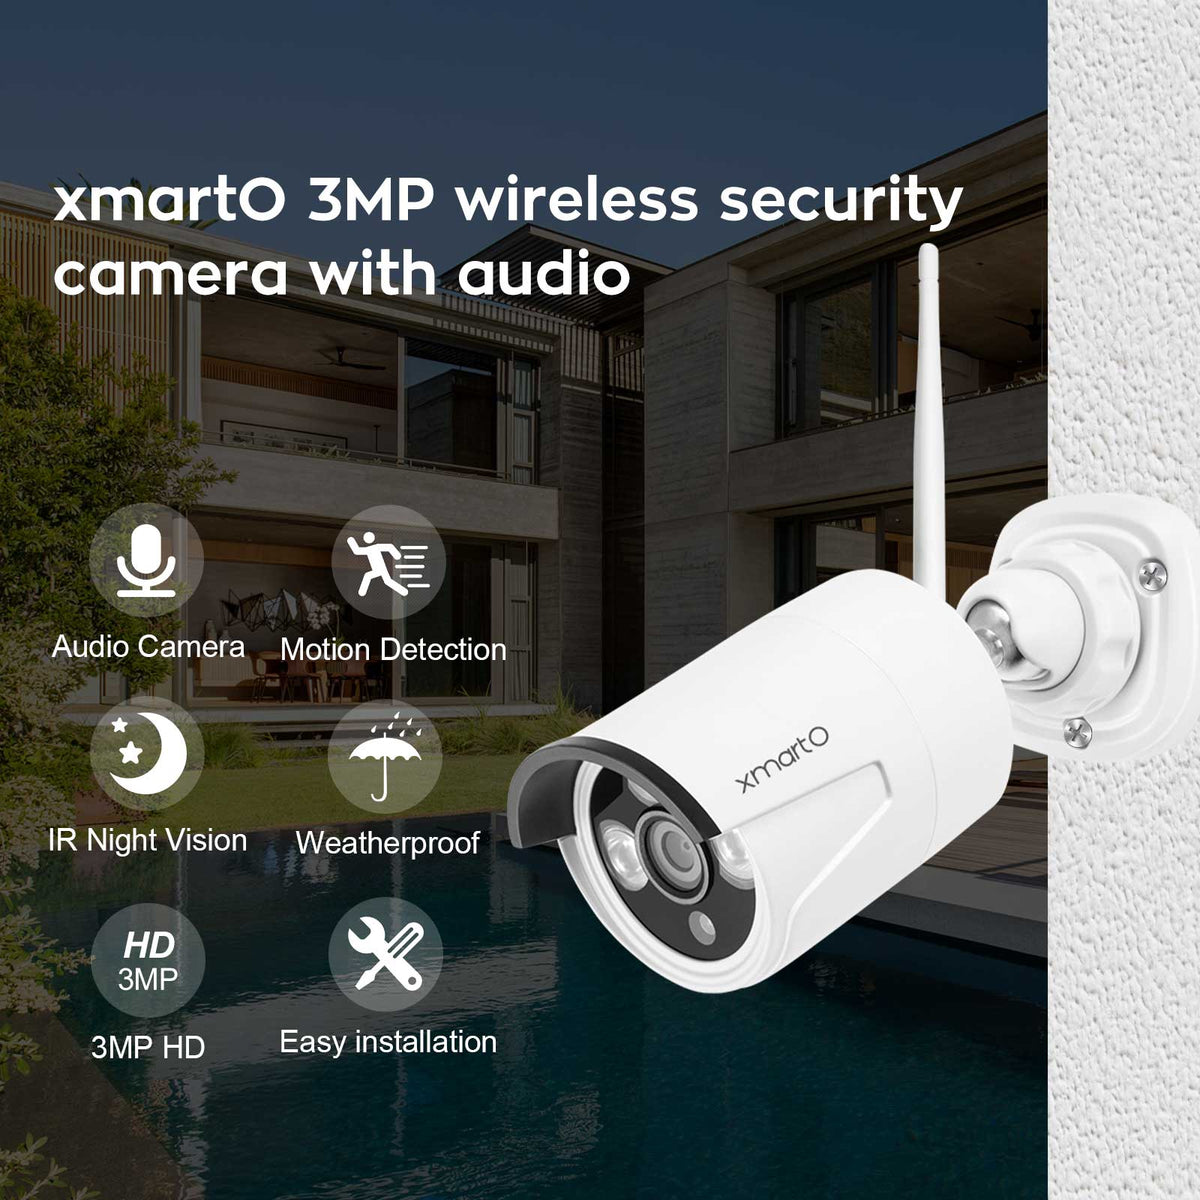 xmartO WB2024-W 3MP WiFi Home Security Camera with Built-in Microphone ...